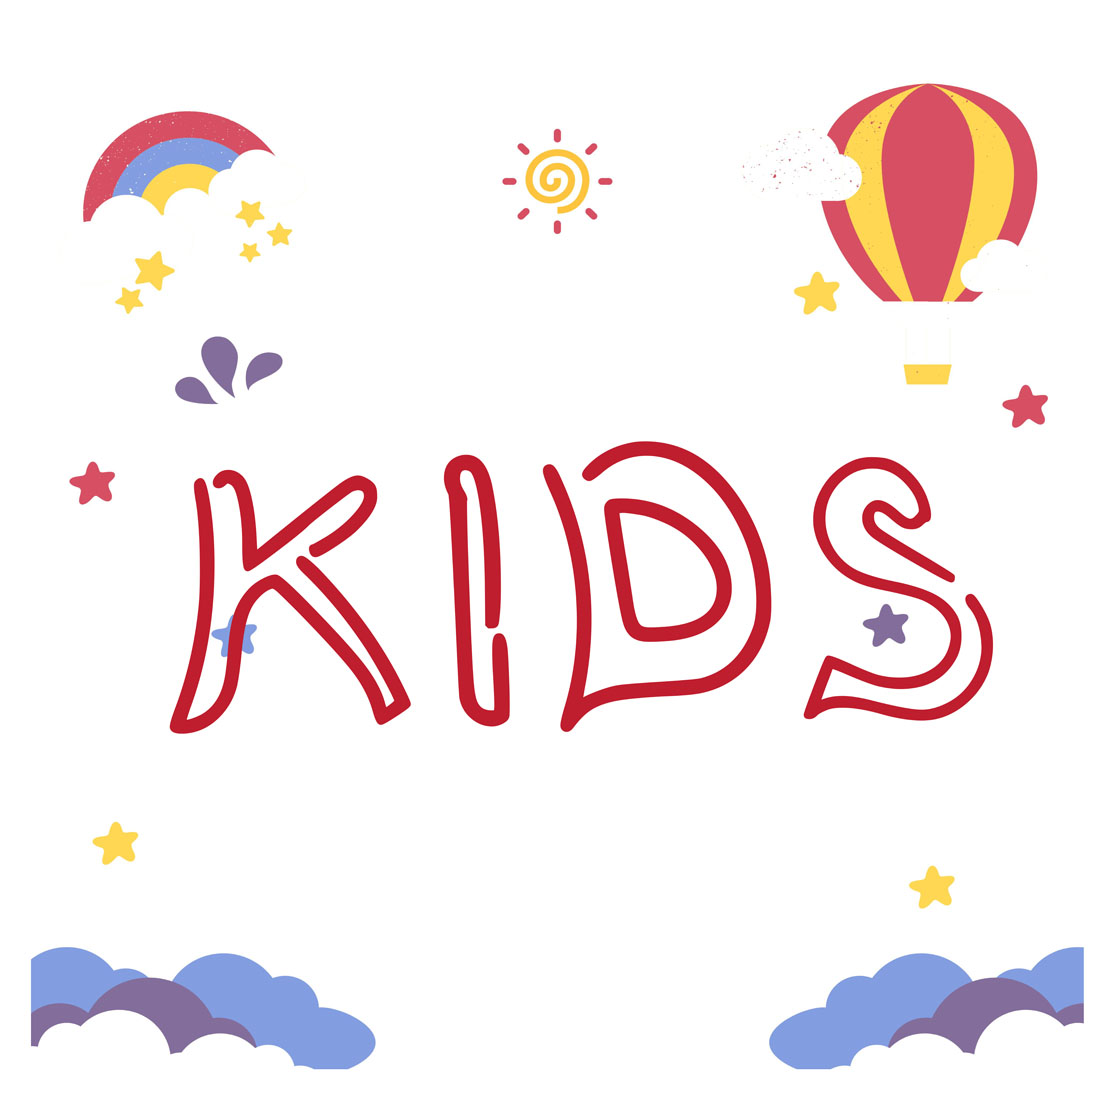 kids funy font with cute and cheerful shapes cover image.